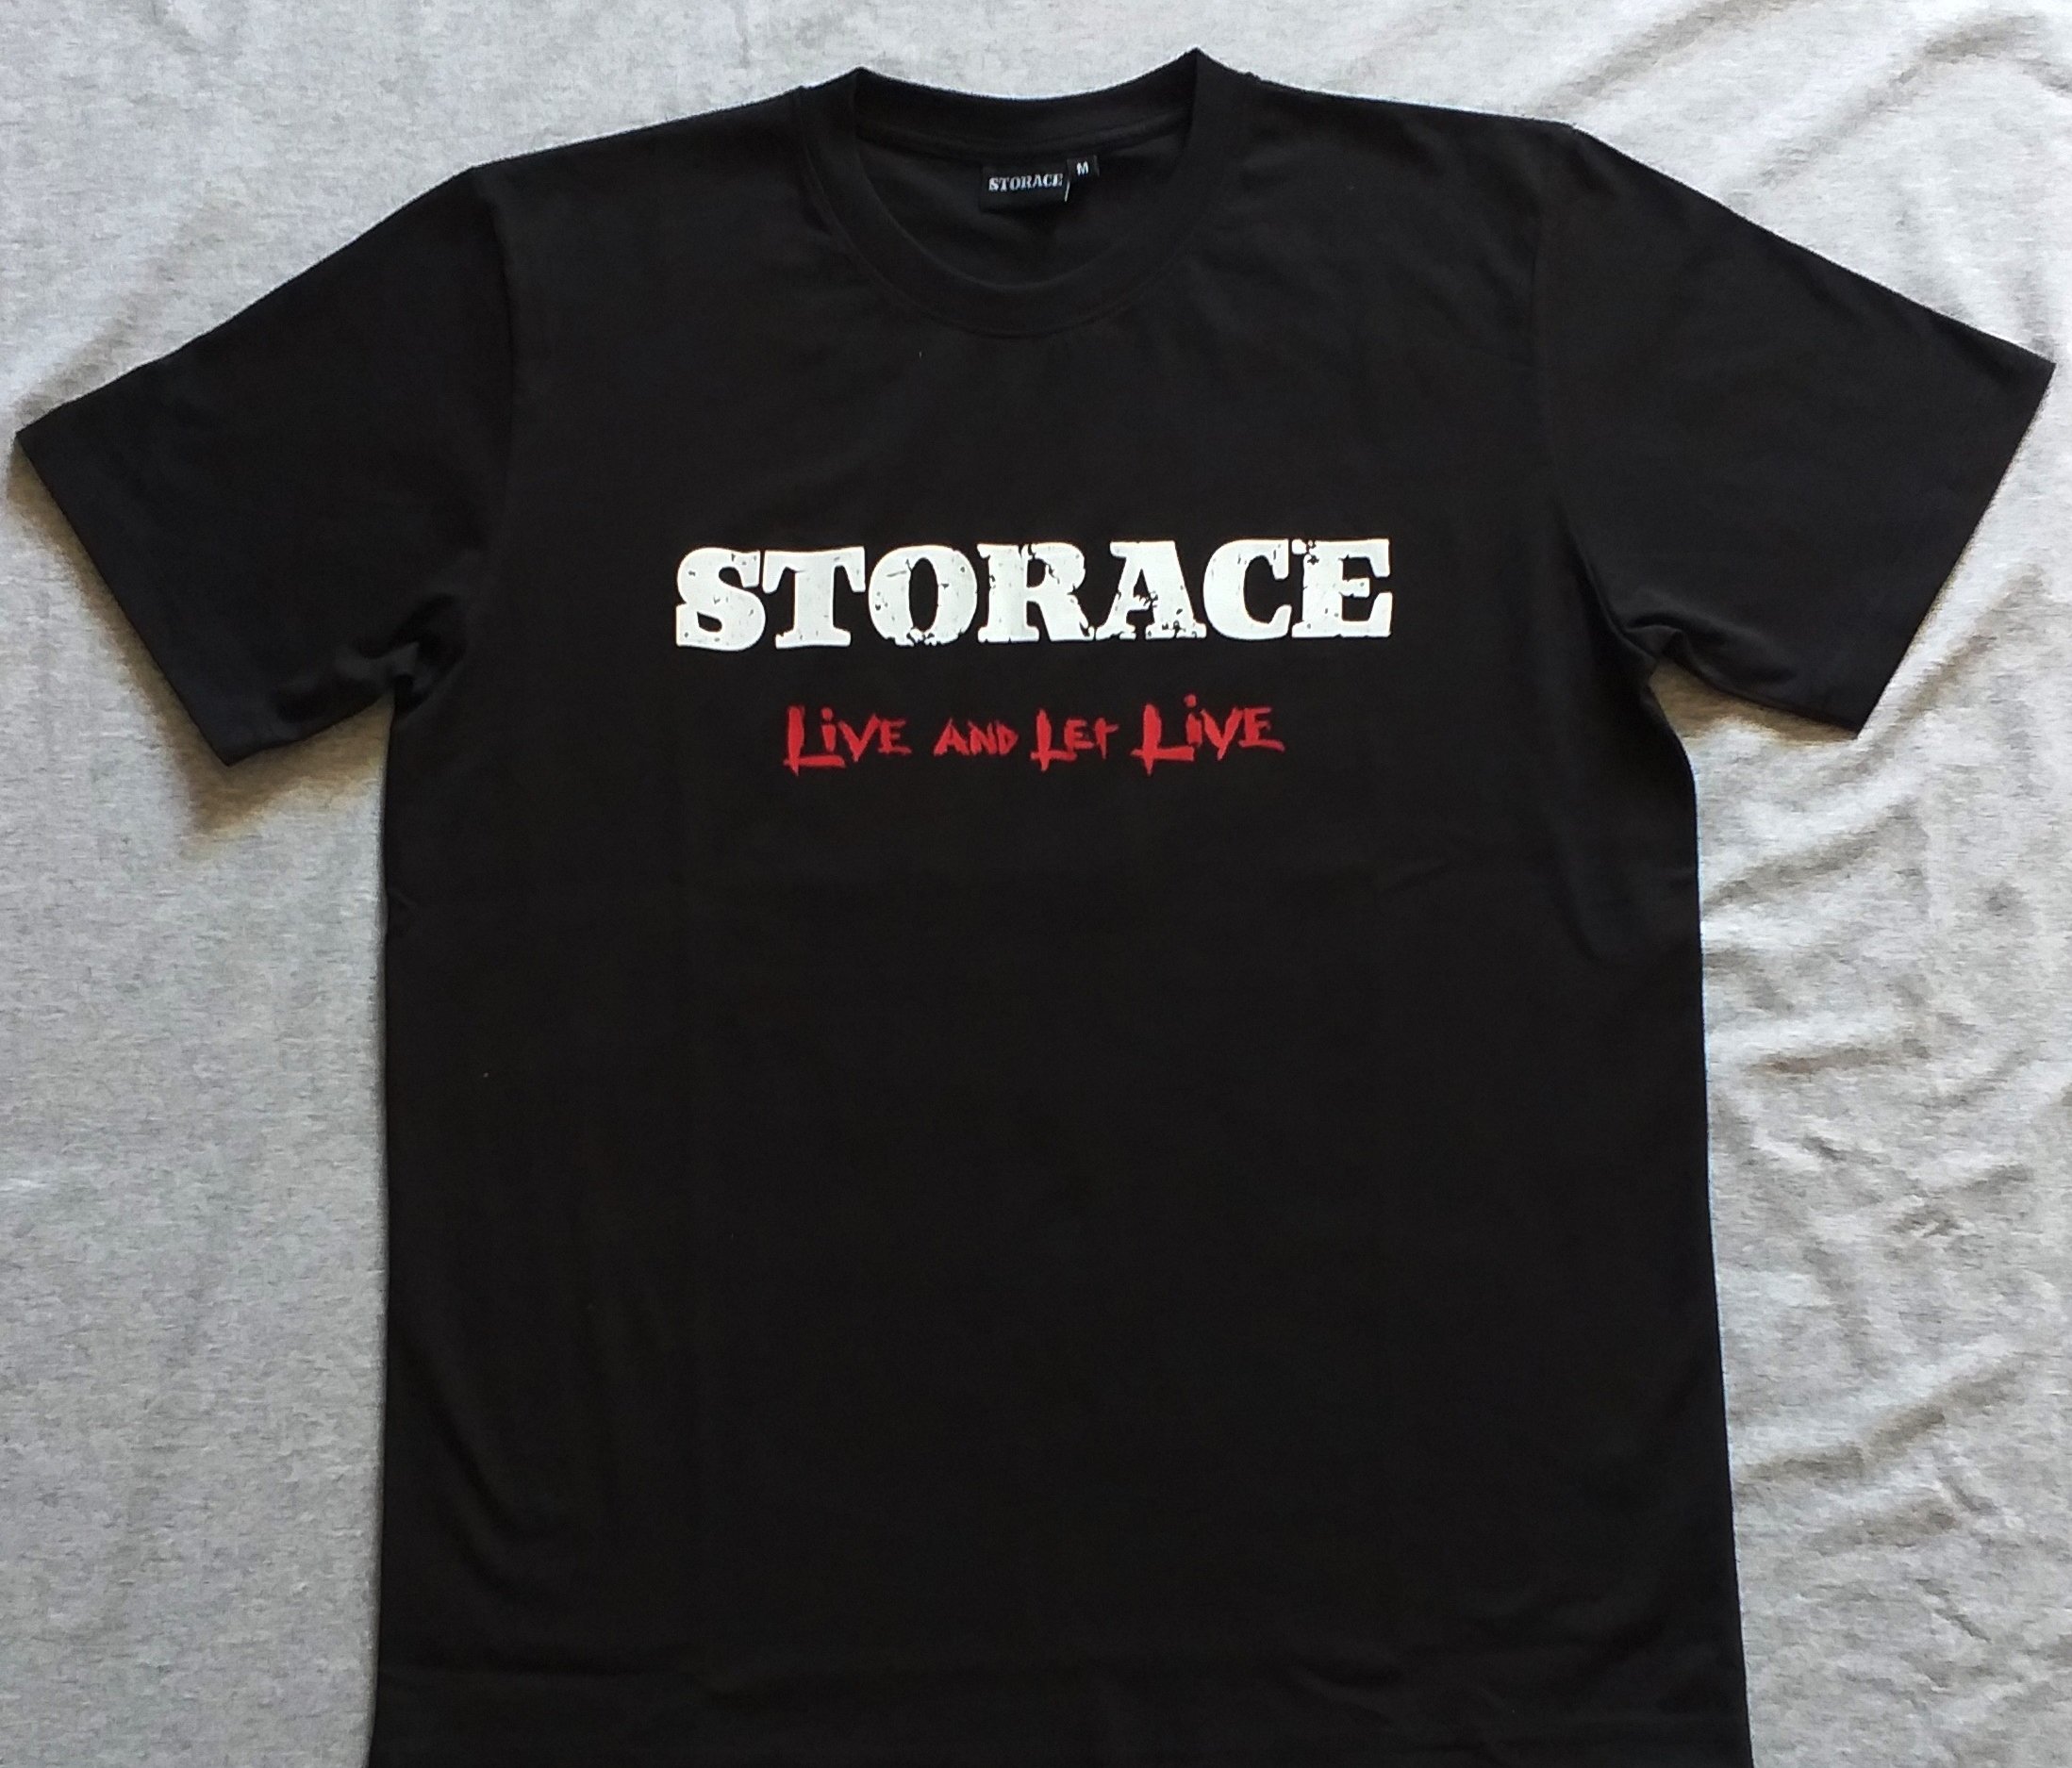 STORACE - Live and let live - T-Shirt Front